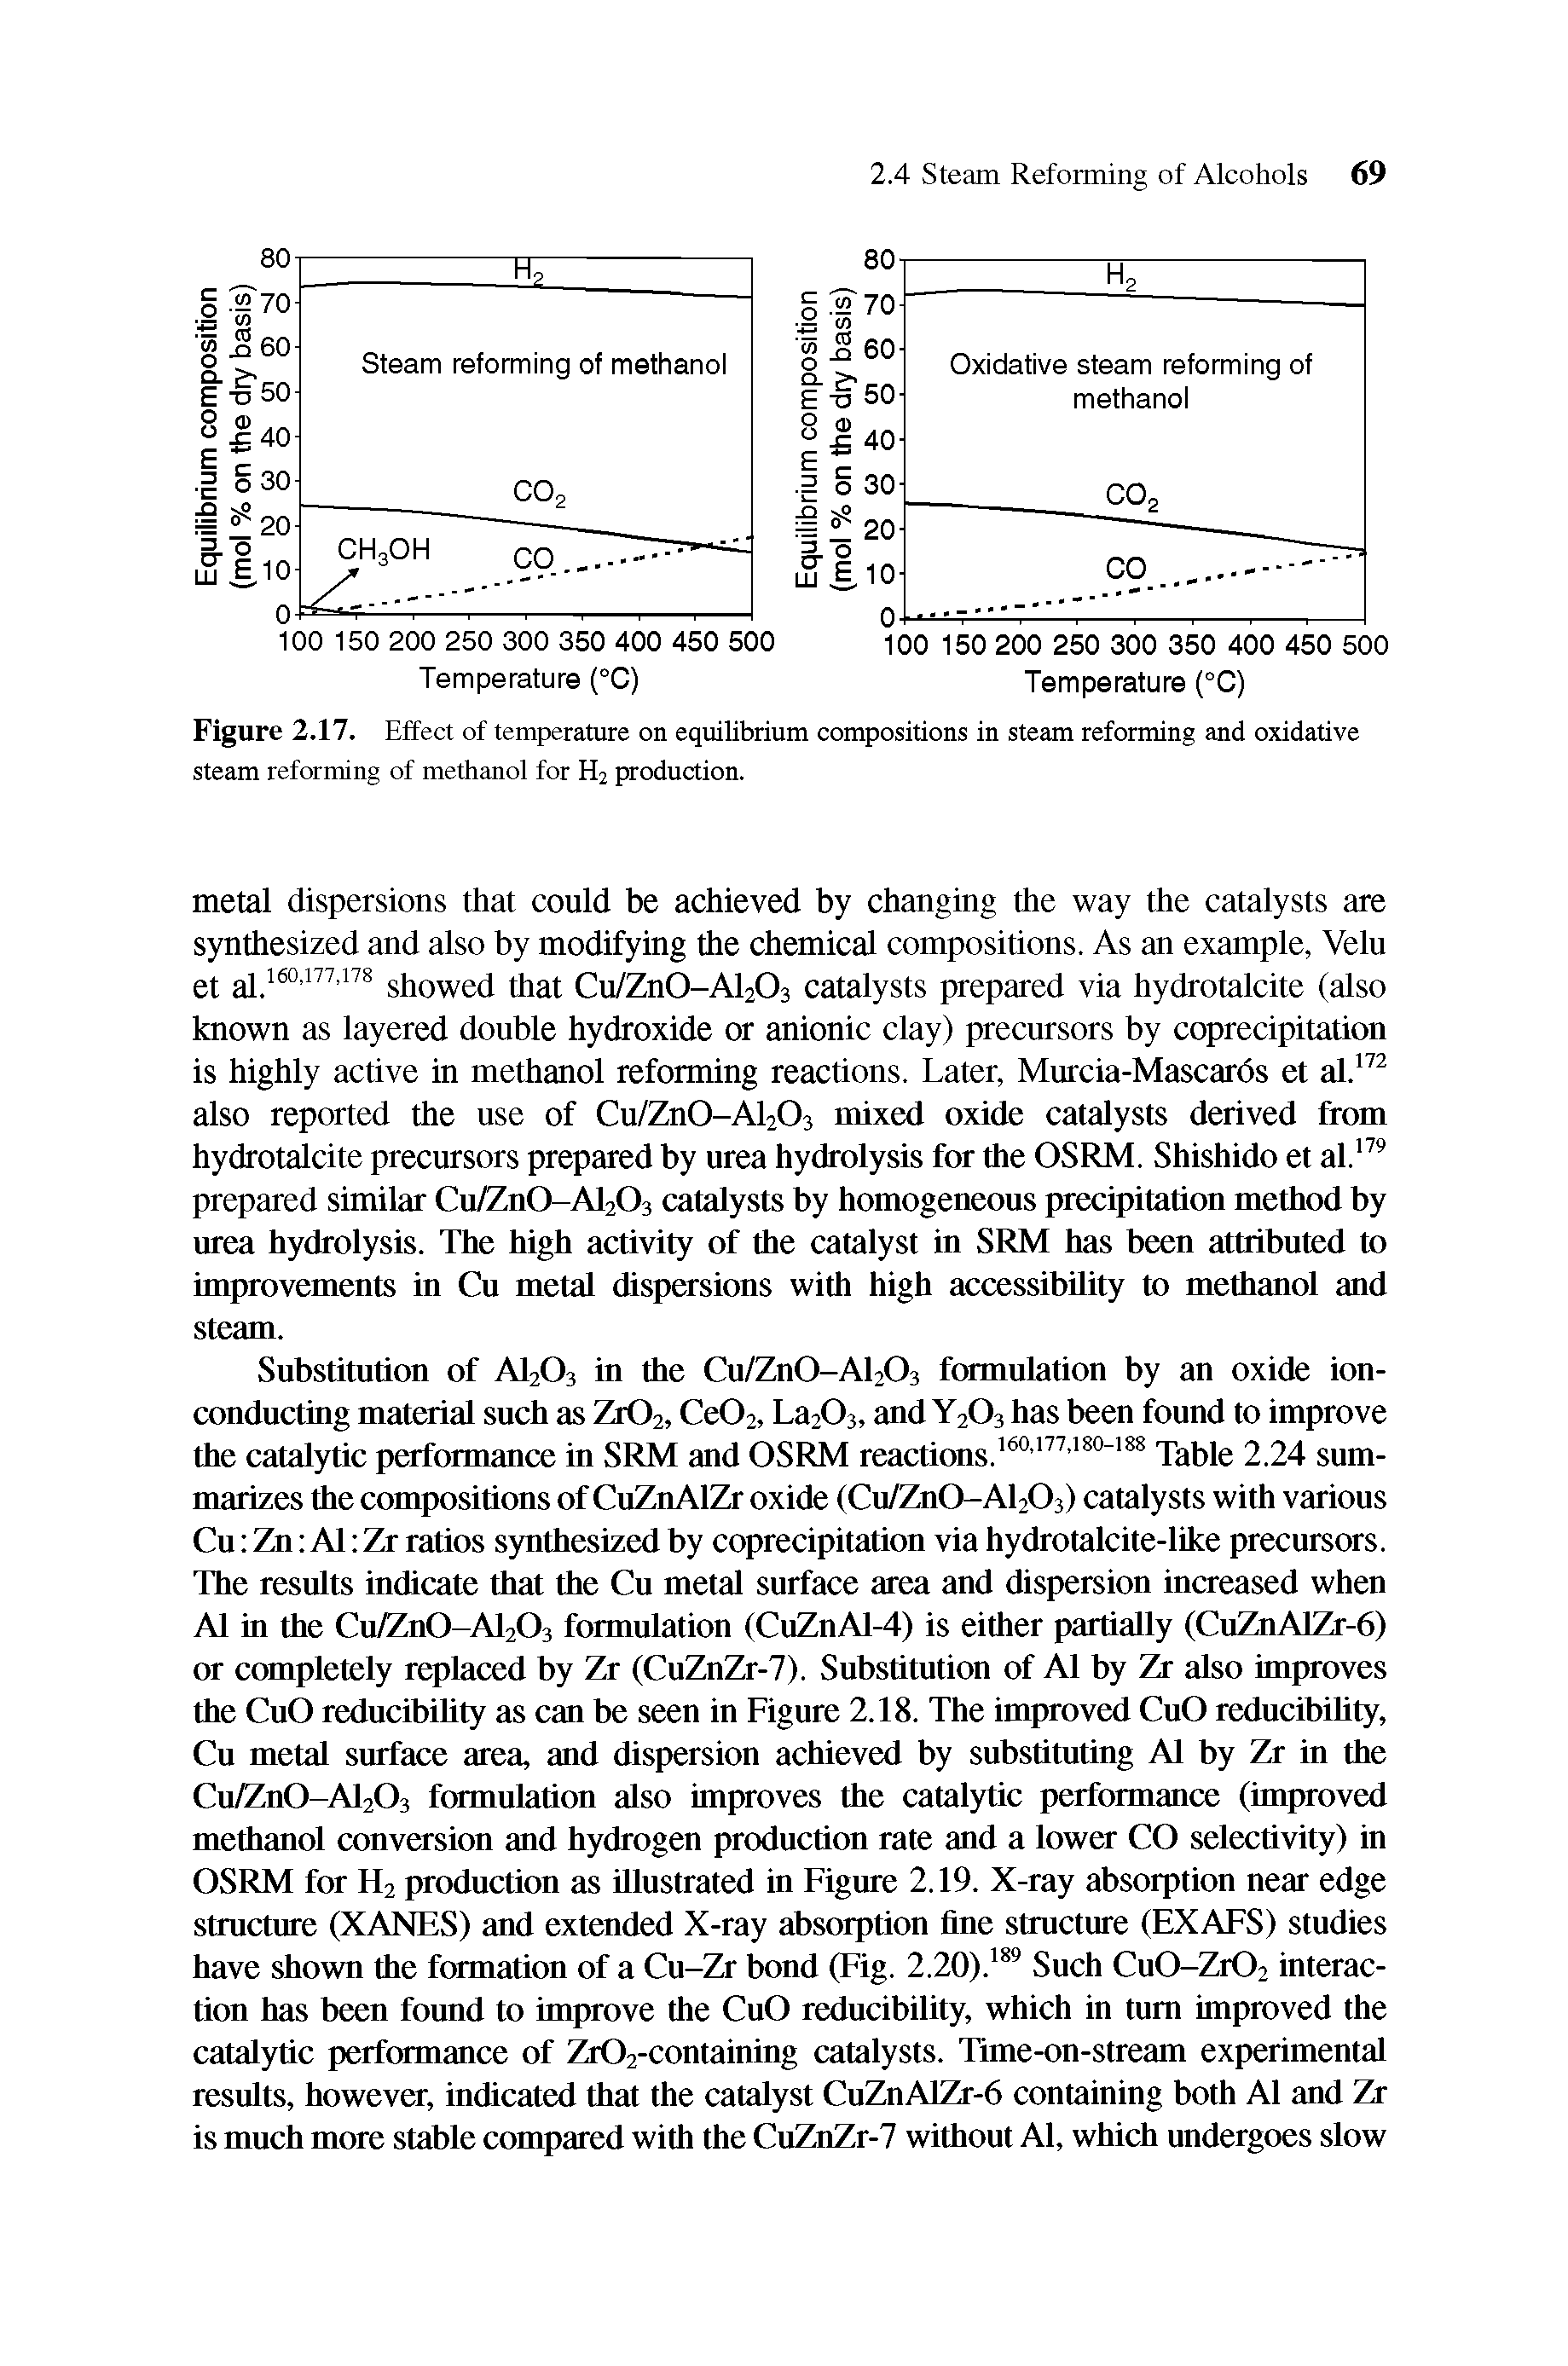 Figure 2.17. Effect of temperature on equilibrium compositions in steam reforming and oxidative steam reforming of methanol for H2 production.